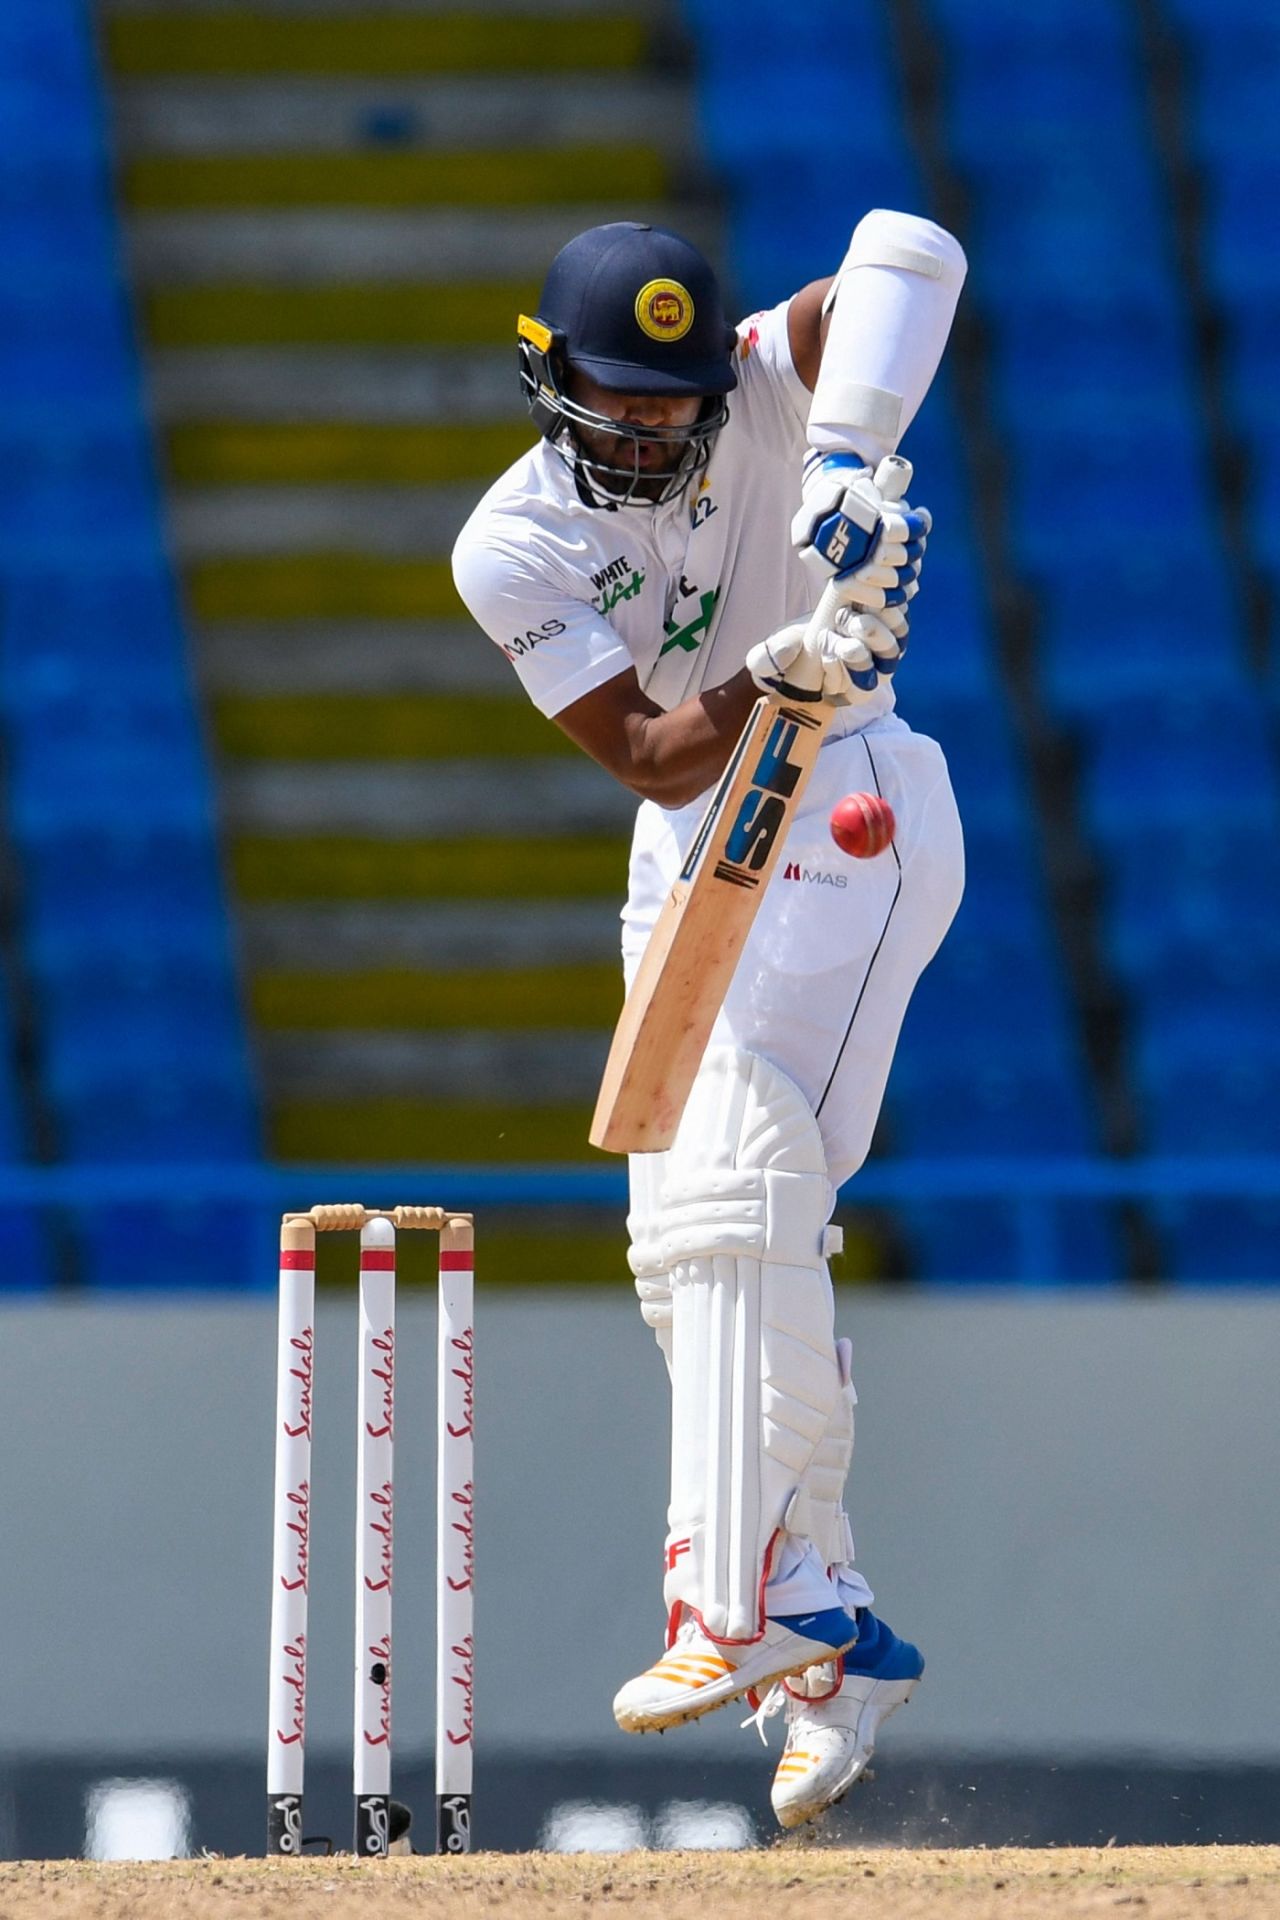 Dinesh Candimal defends off the back foot, West Indies vs Sri Lanka, 2nd Test, North Sound, 3rd day, March 31, 2021